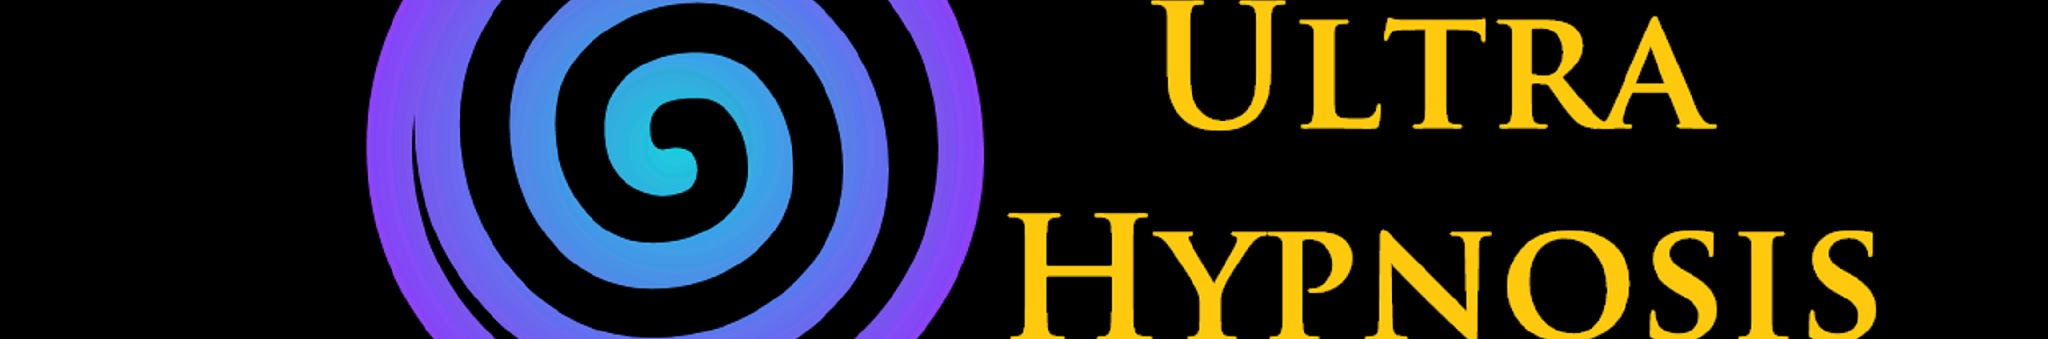 Ultrahypnosis Hypnotic Induction